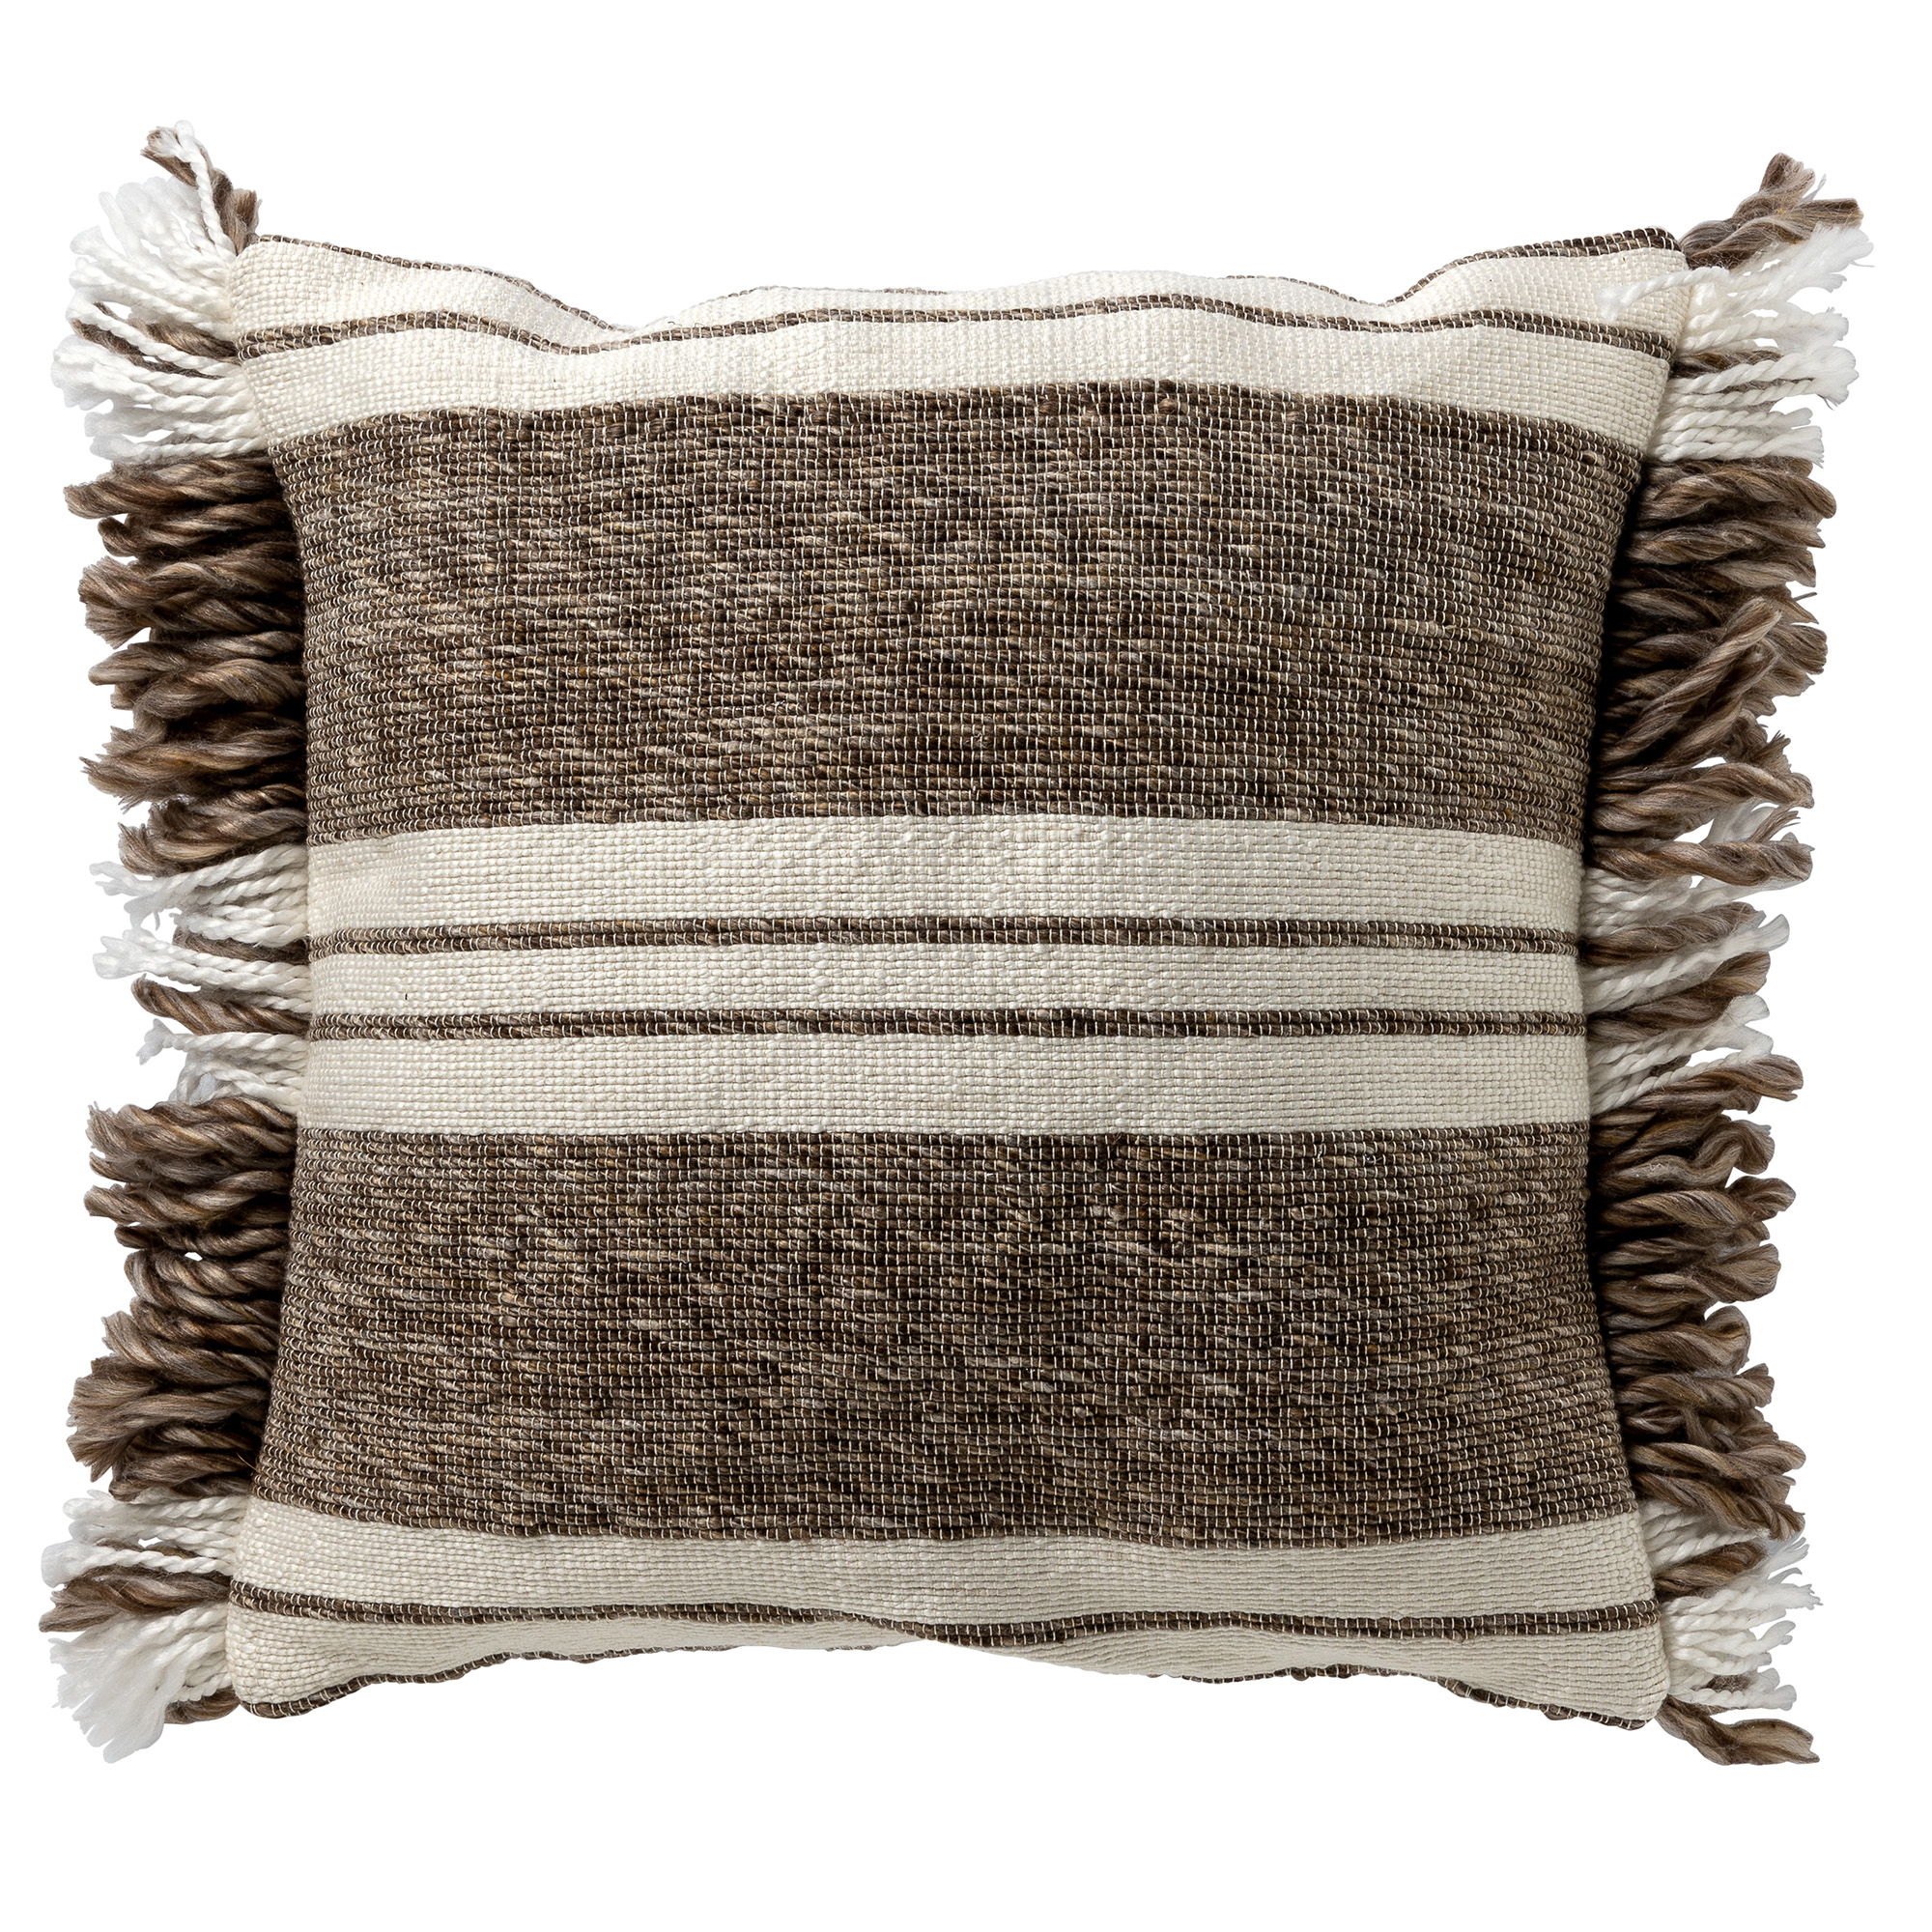 EDGAR - Cushion 45x45 cm with cushion cover made of 85% recycled polyester - Eco Line collection - Driftwood - taupe 